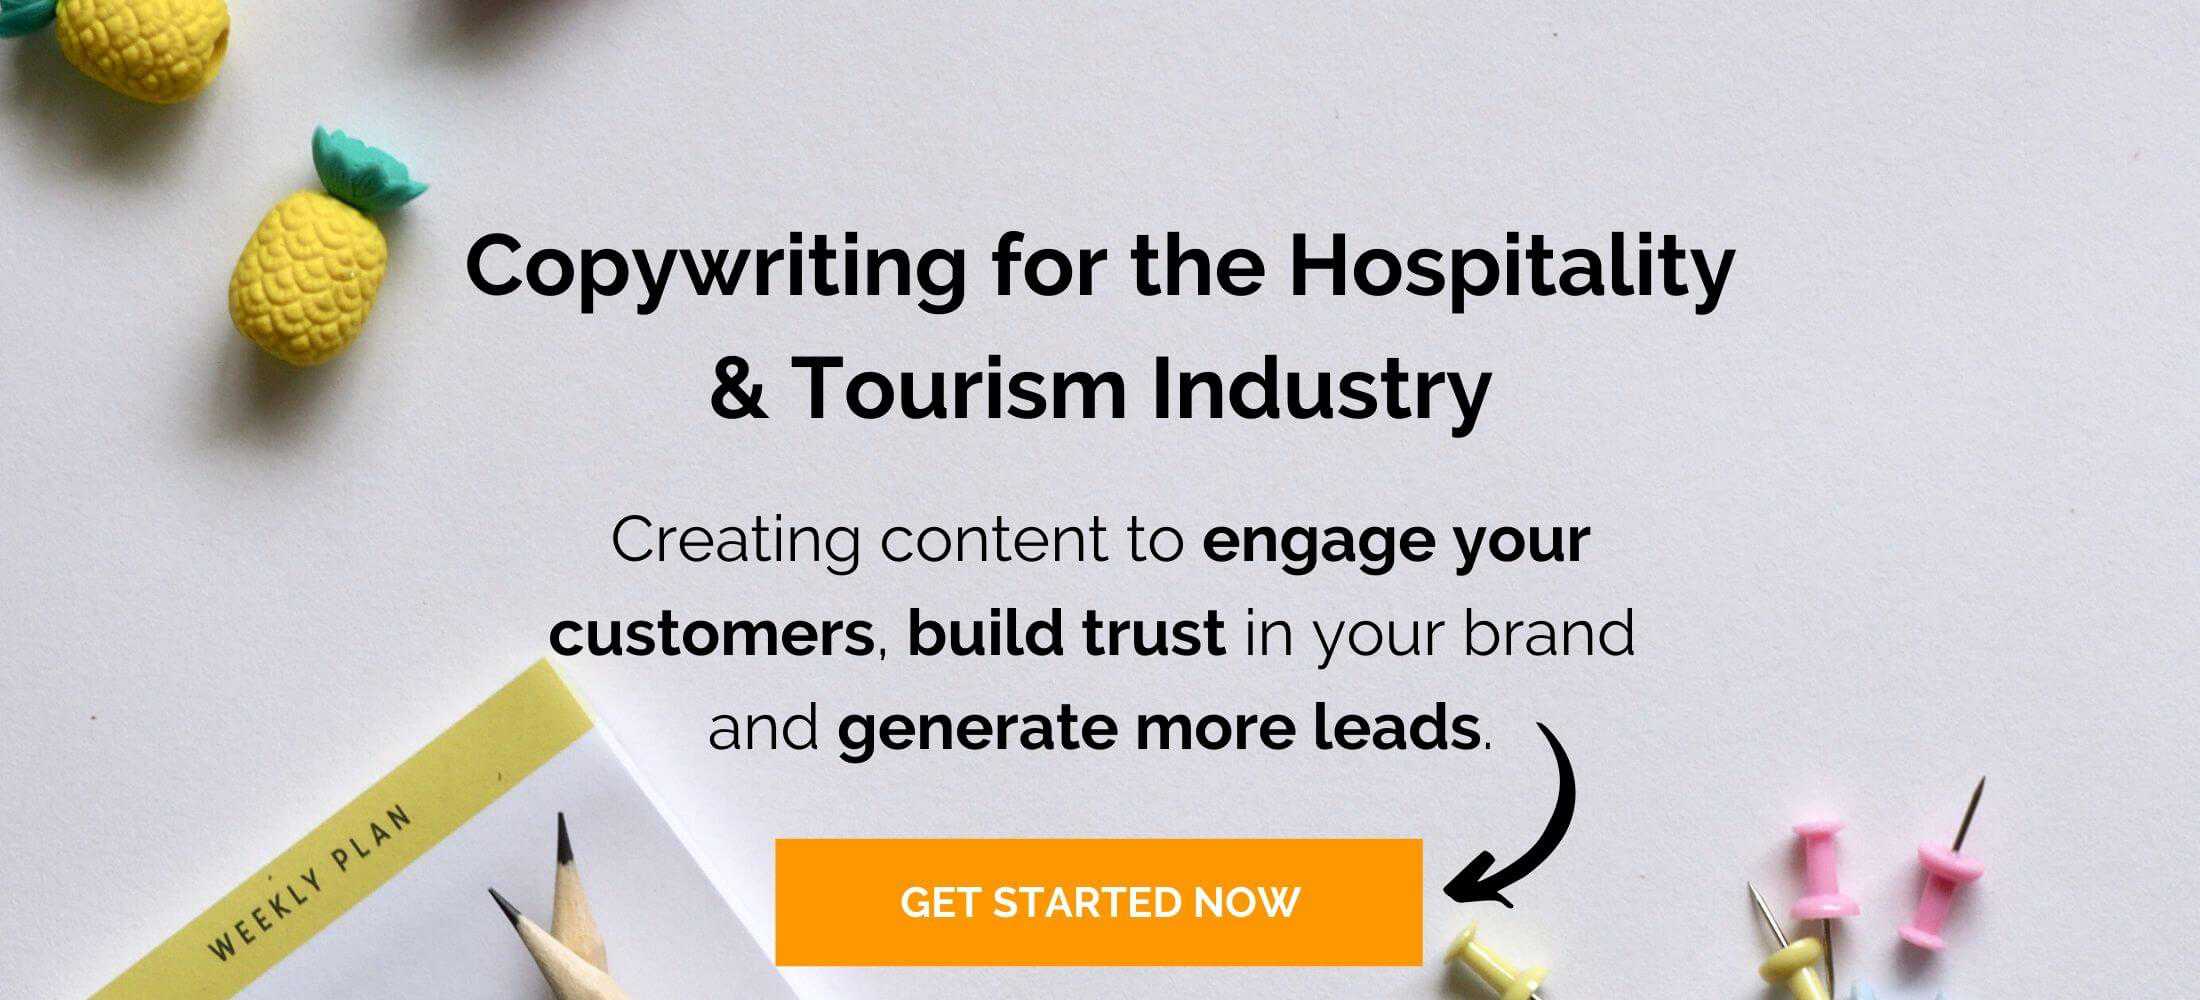 Hospitality Copywriting Home Page Banner